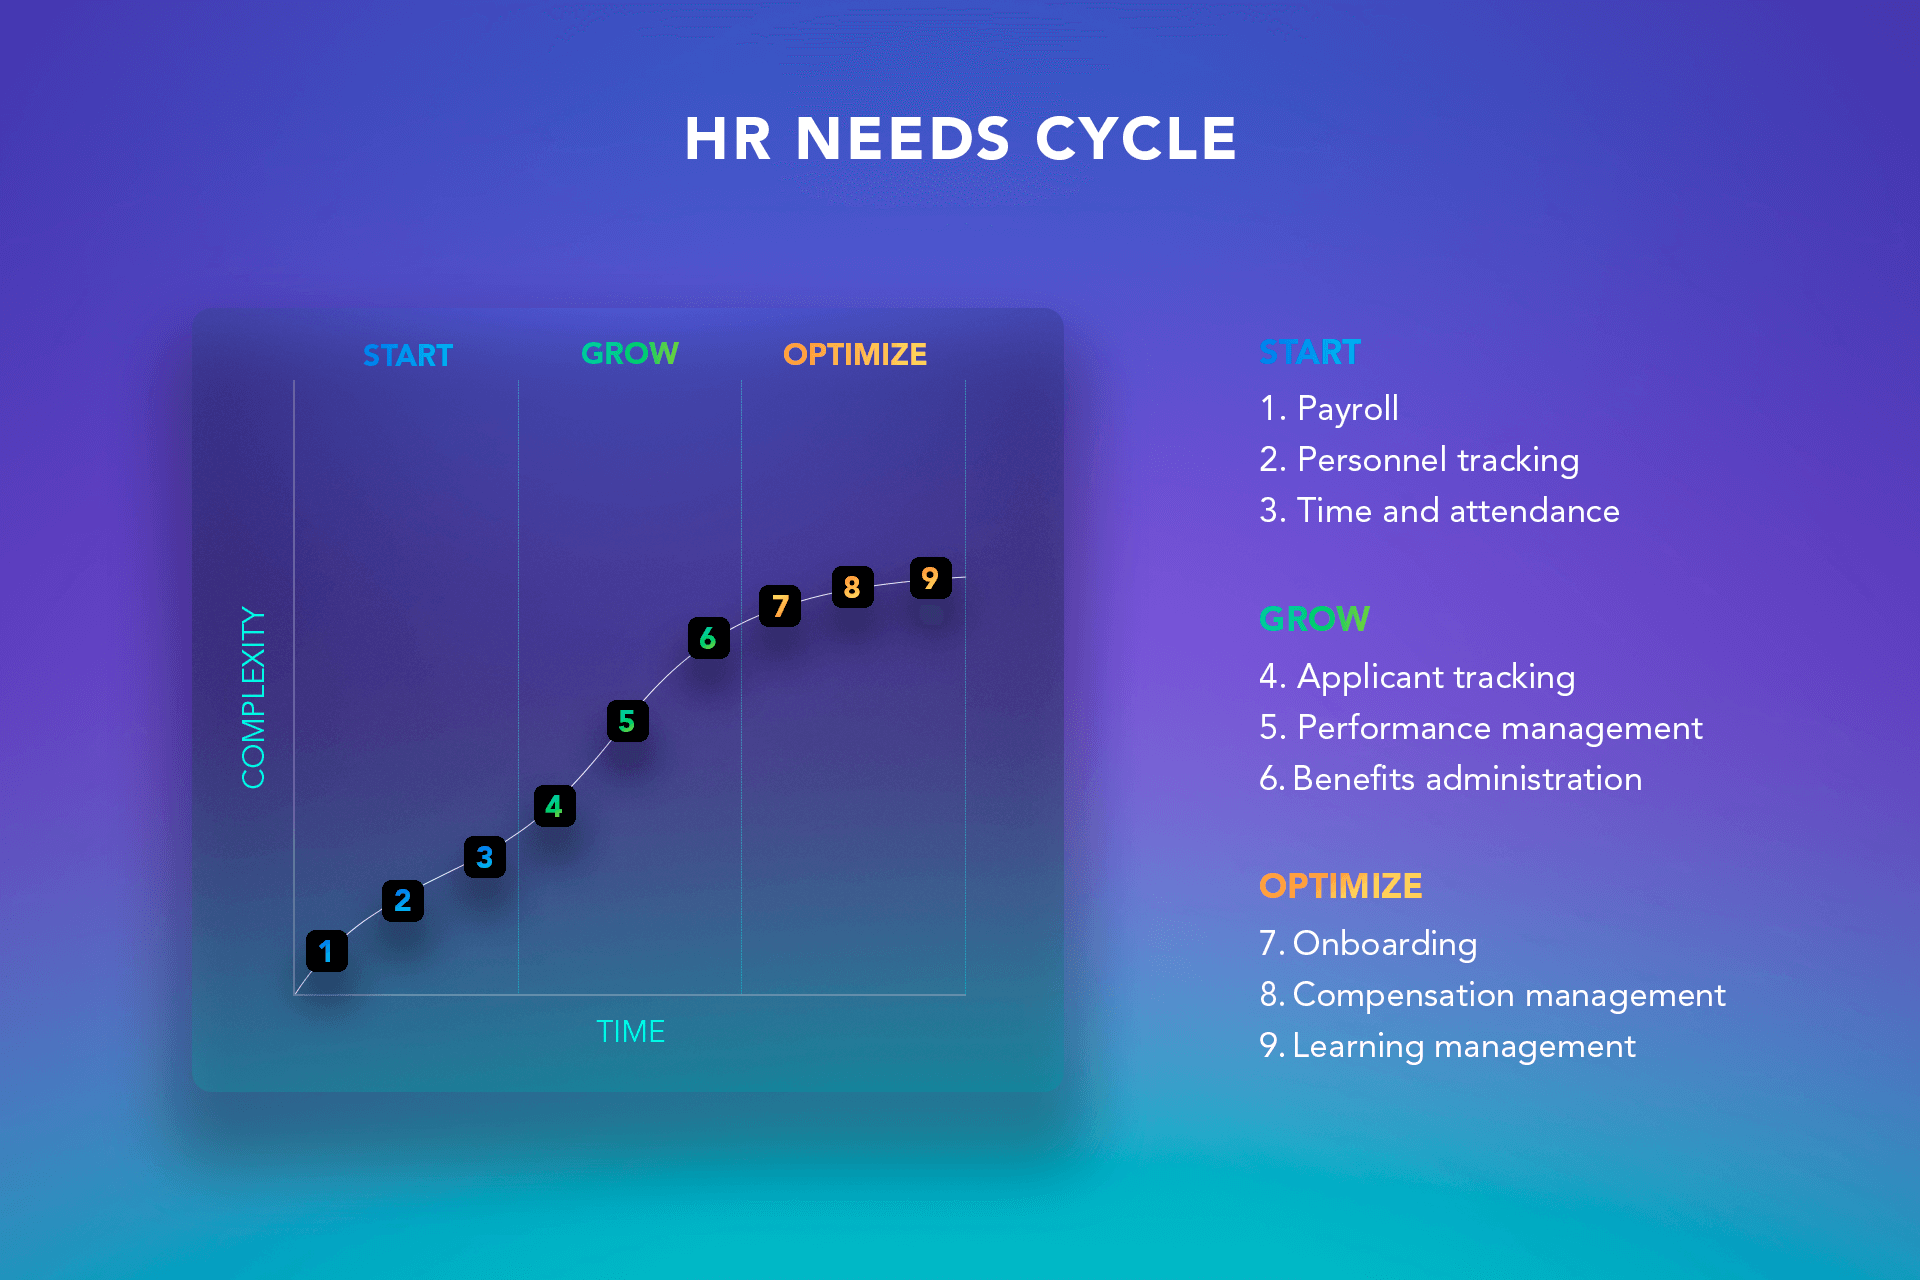 HR Management Software: Needs Cycle